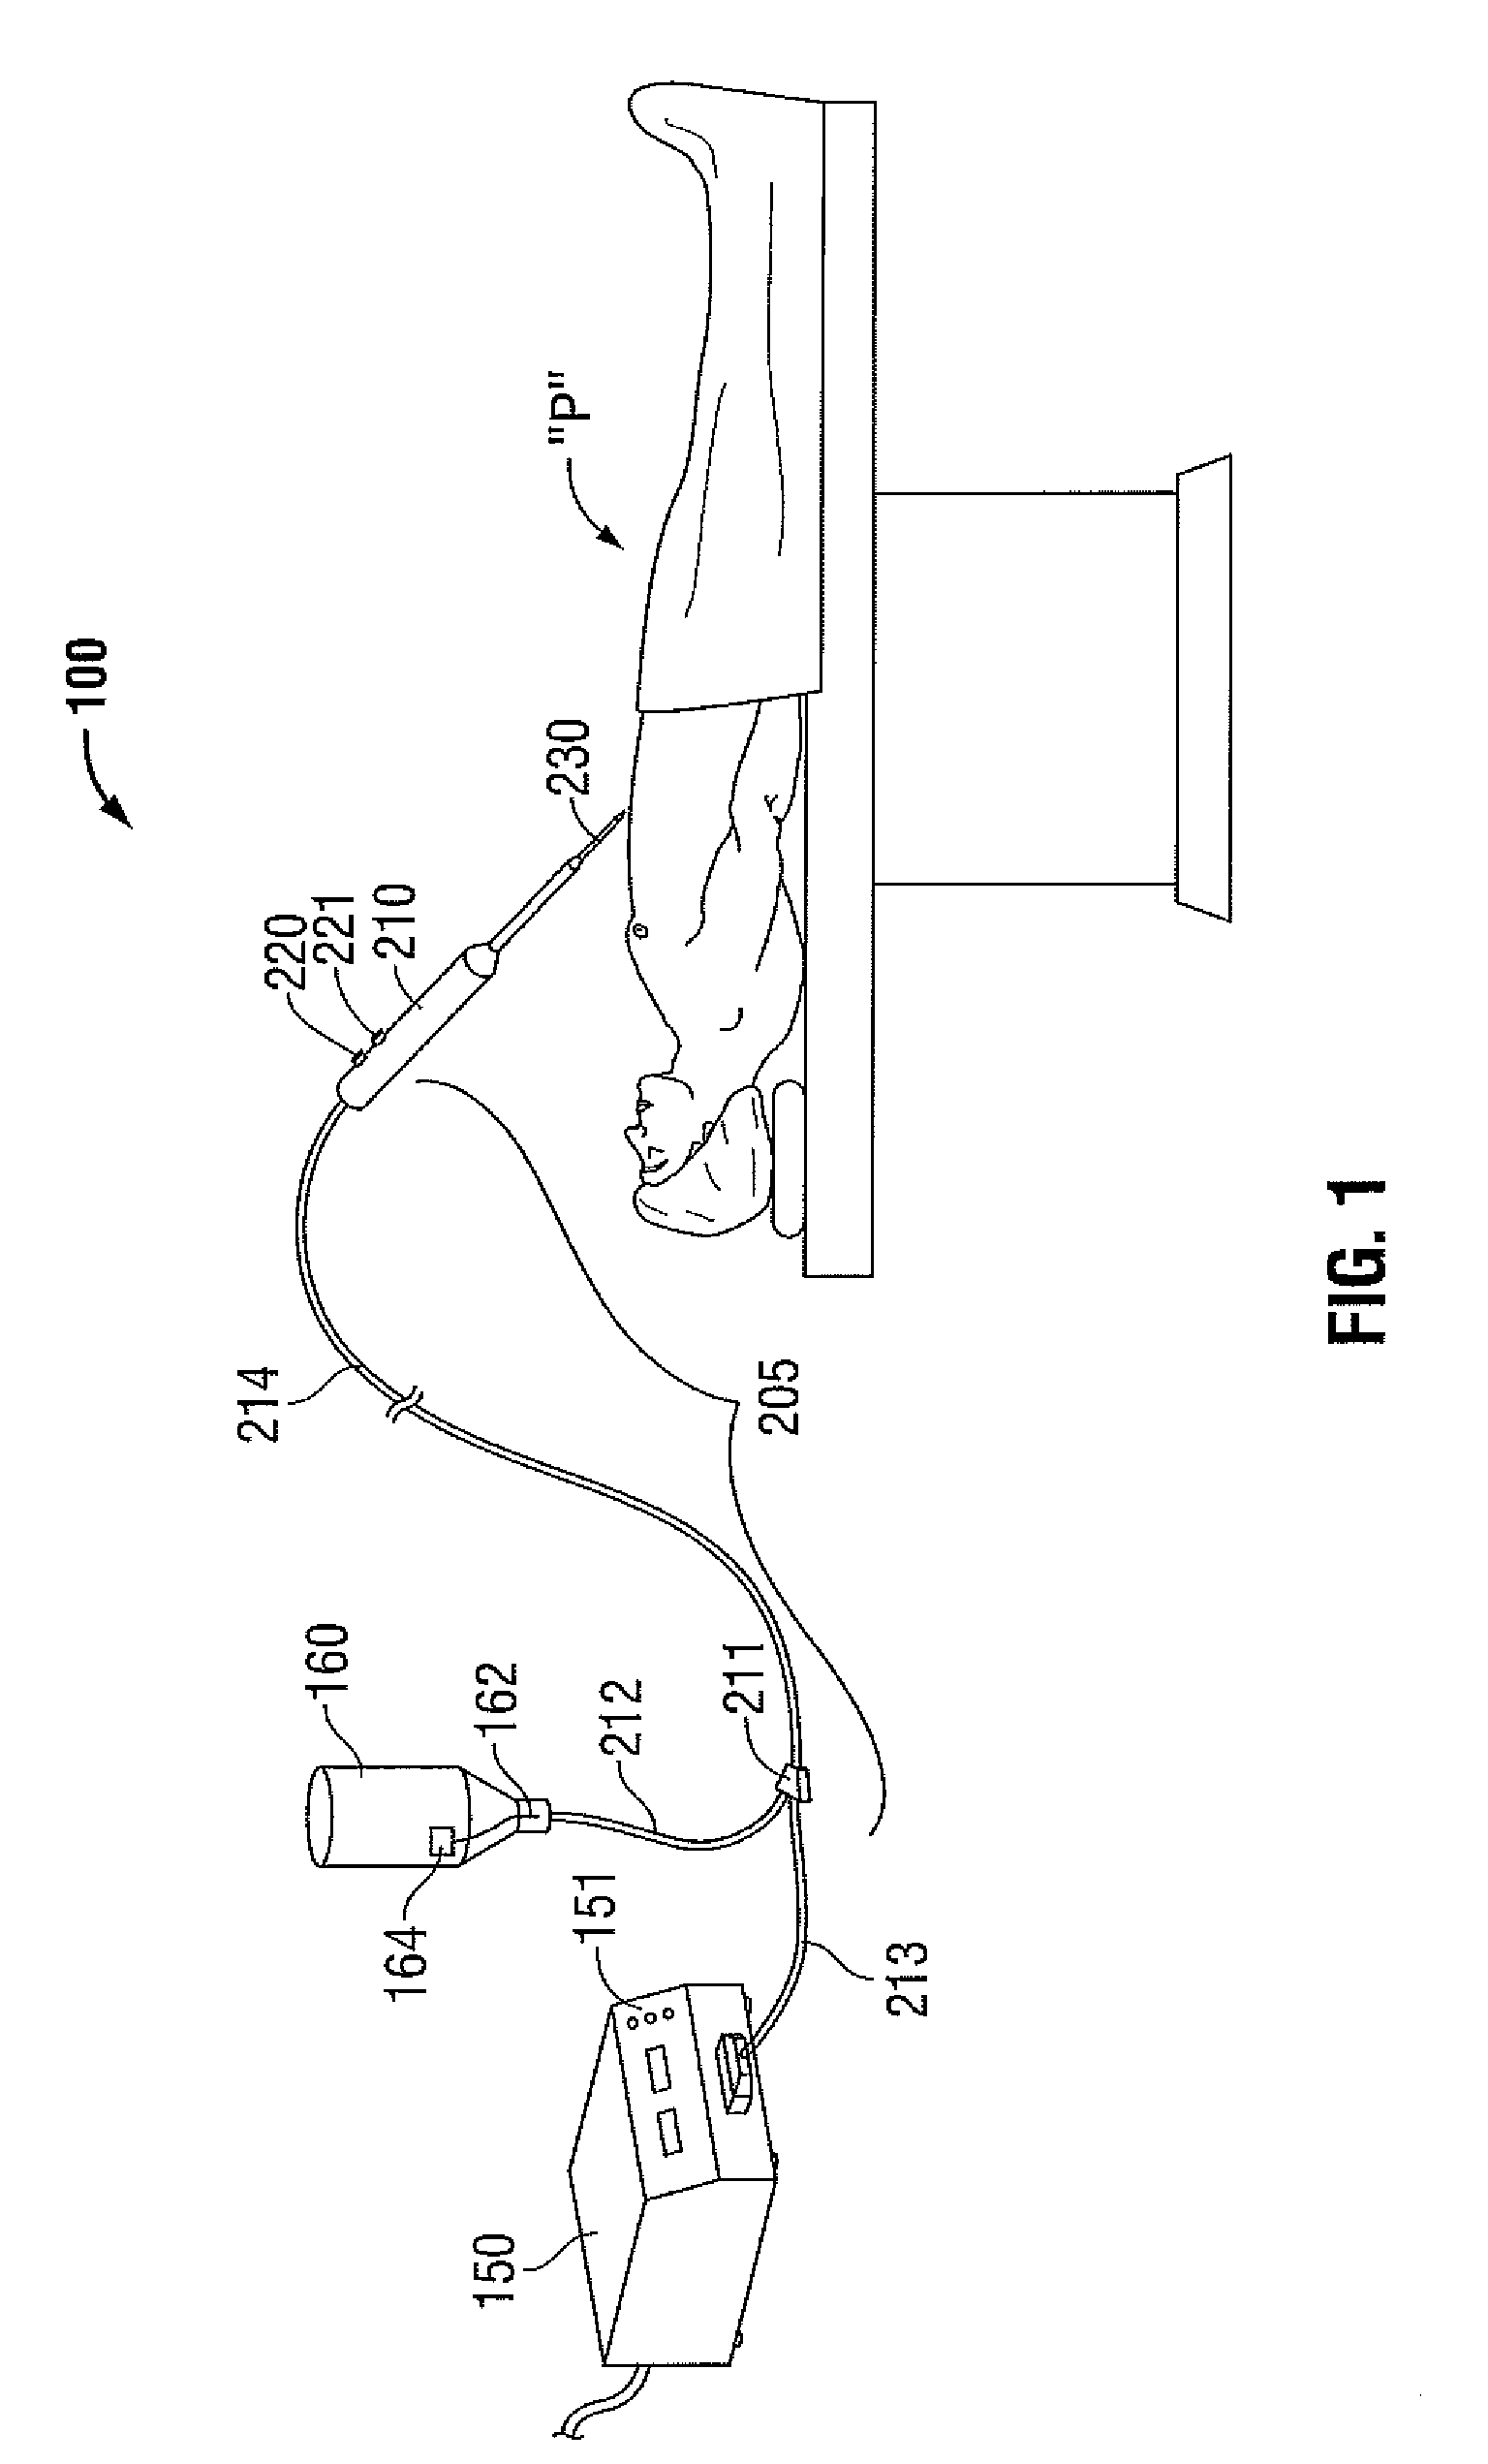 Ultrasonic Surgical System Having A Fluid Cooled Blade And Related Cooling Methods Therefor